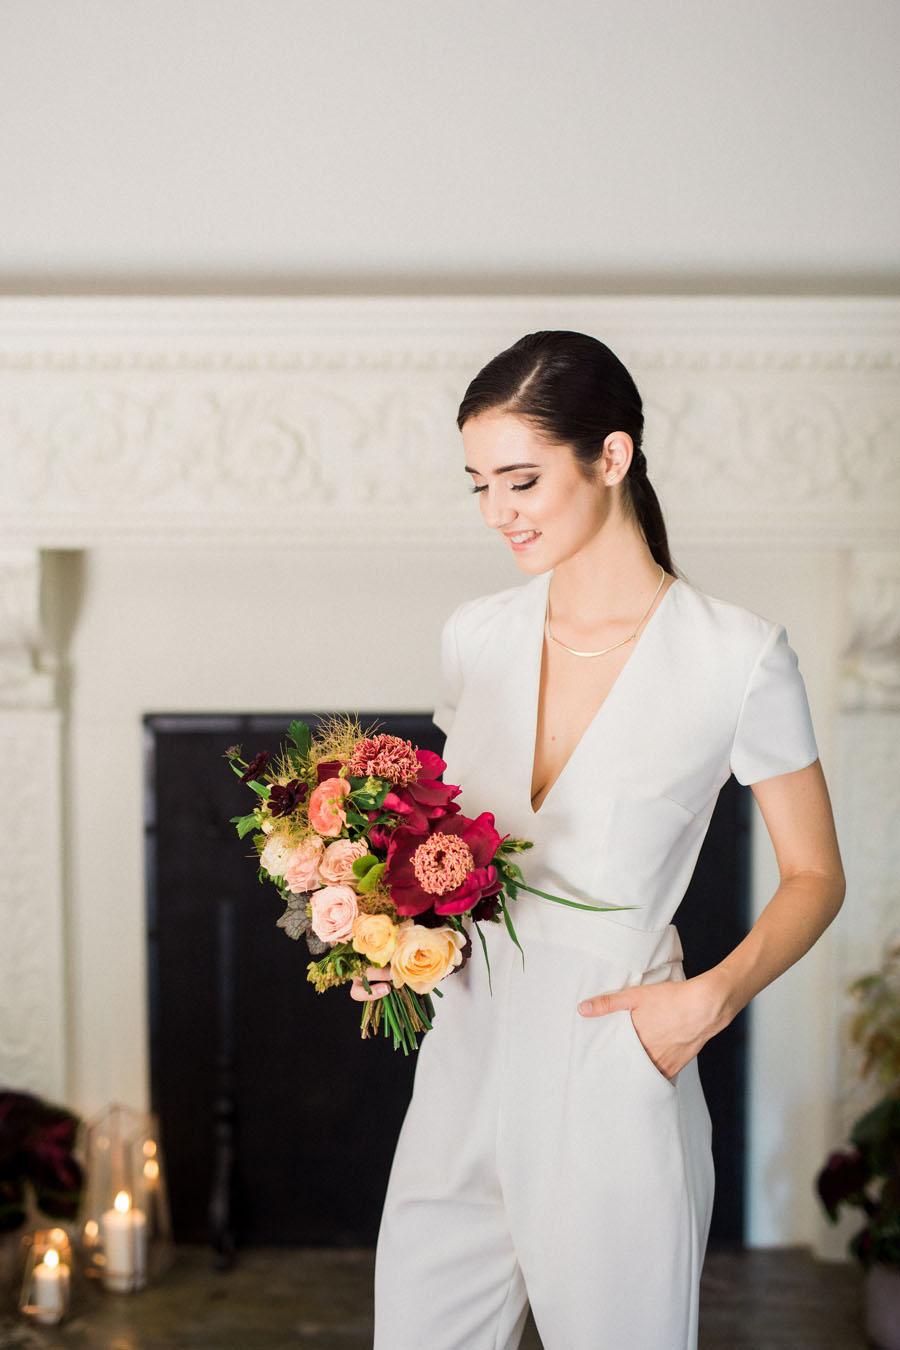 An Intimate Elopement That Proves You Don't Have to Sacrifice Style